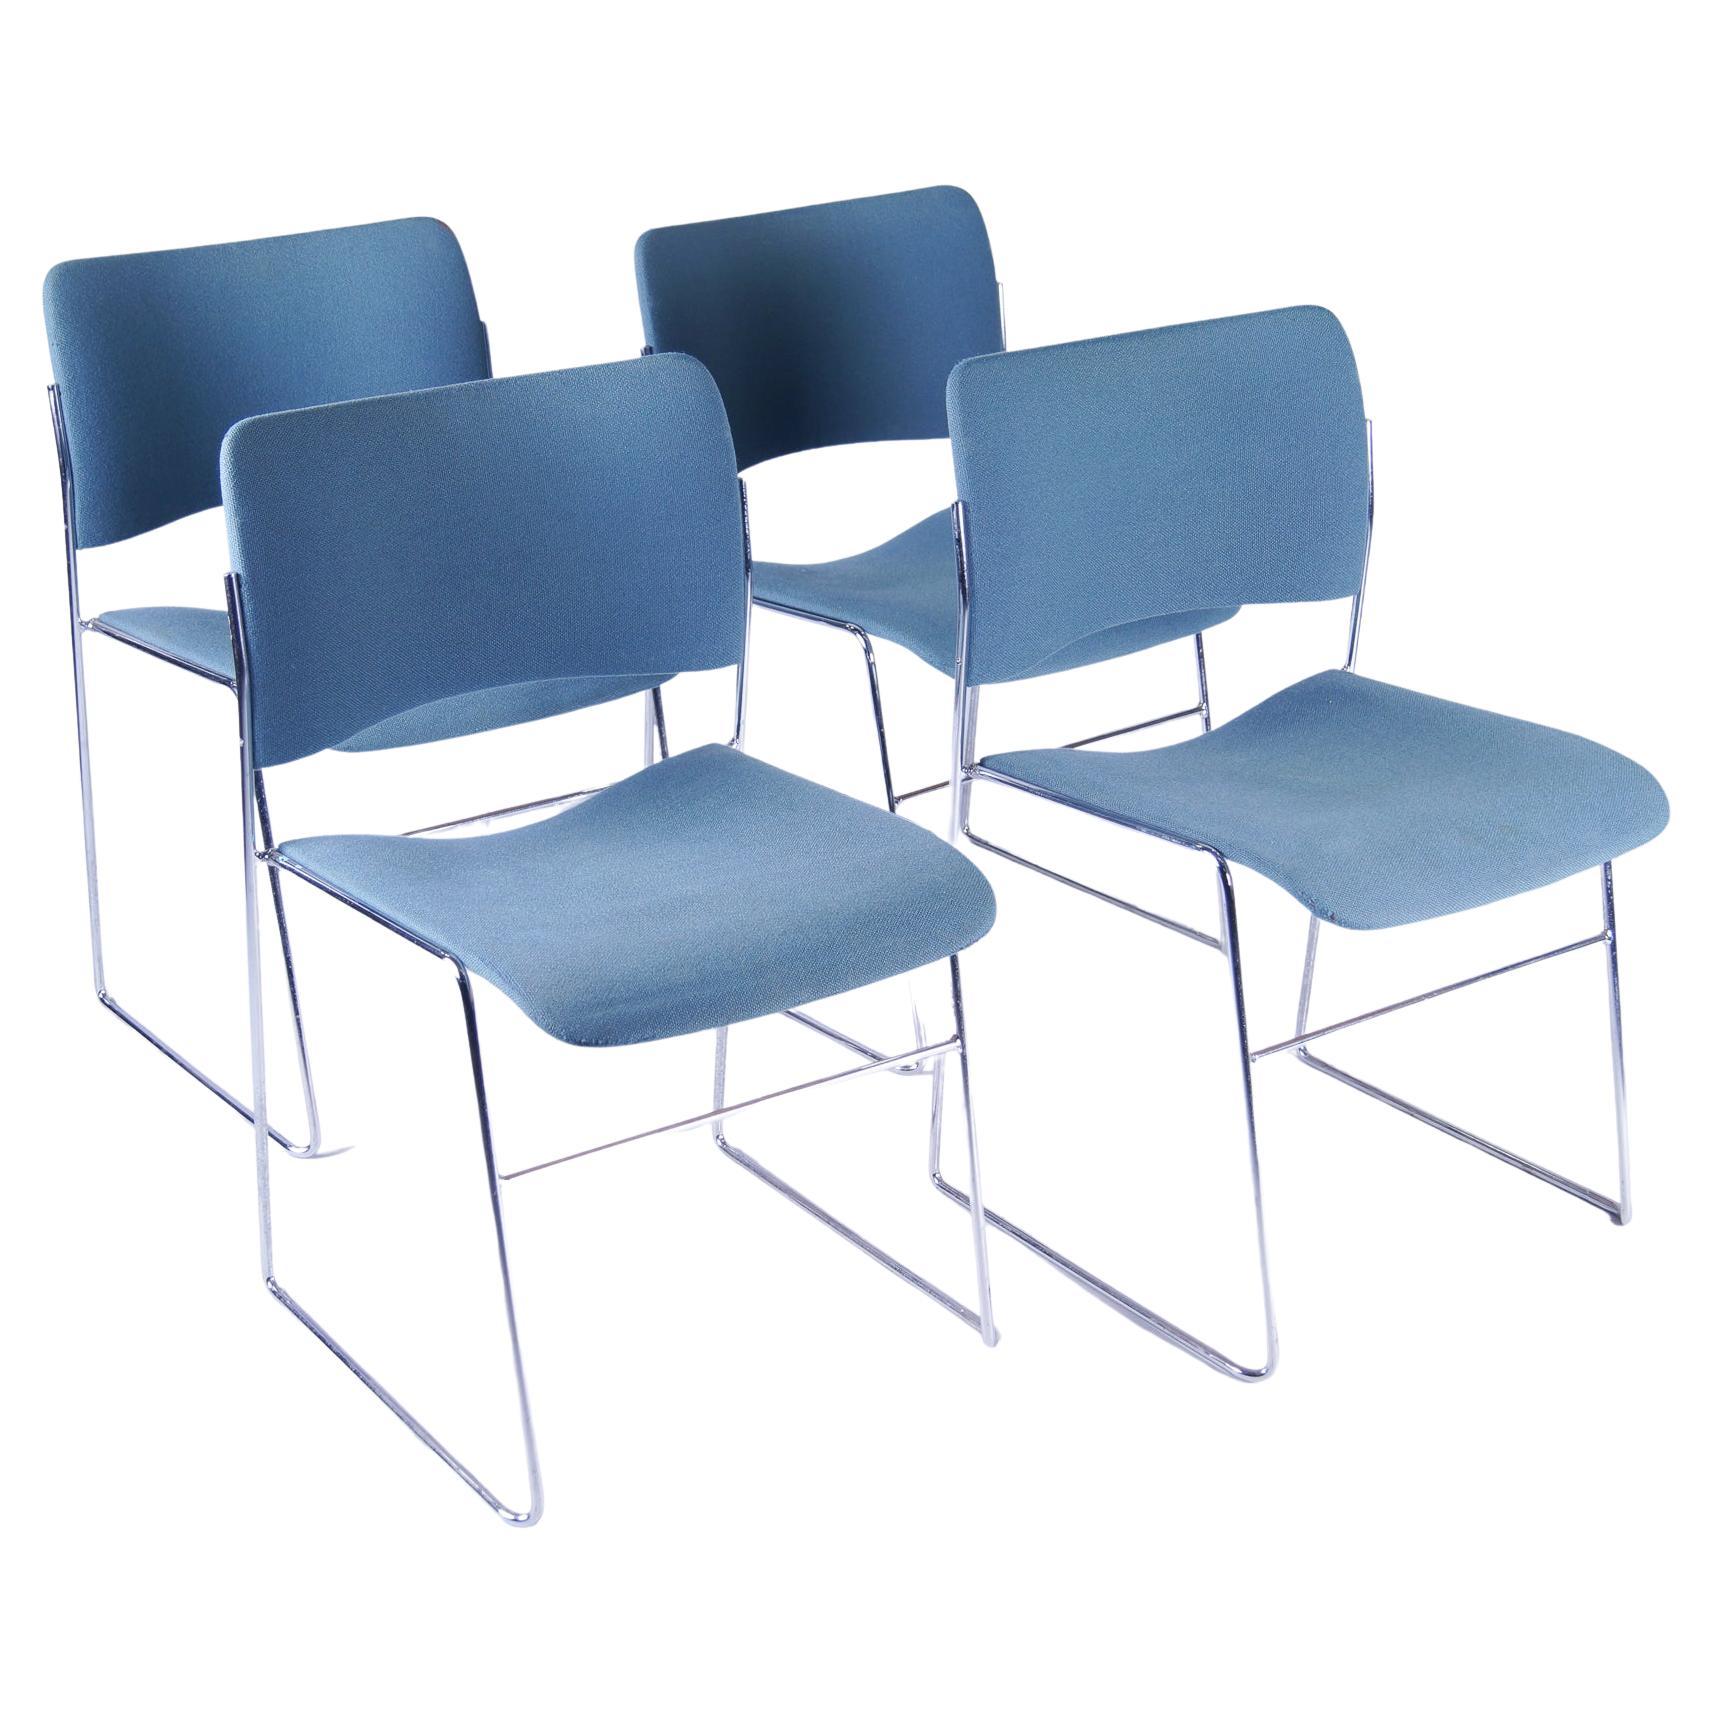 David Rownland for Howe, 40/4 Chairs, Set of 4